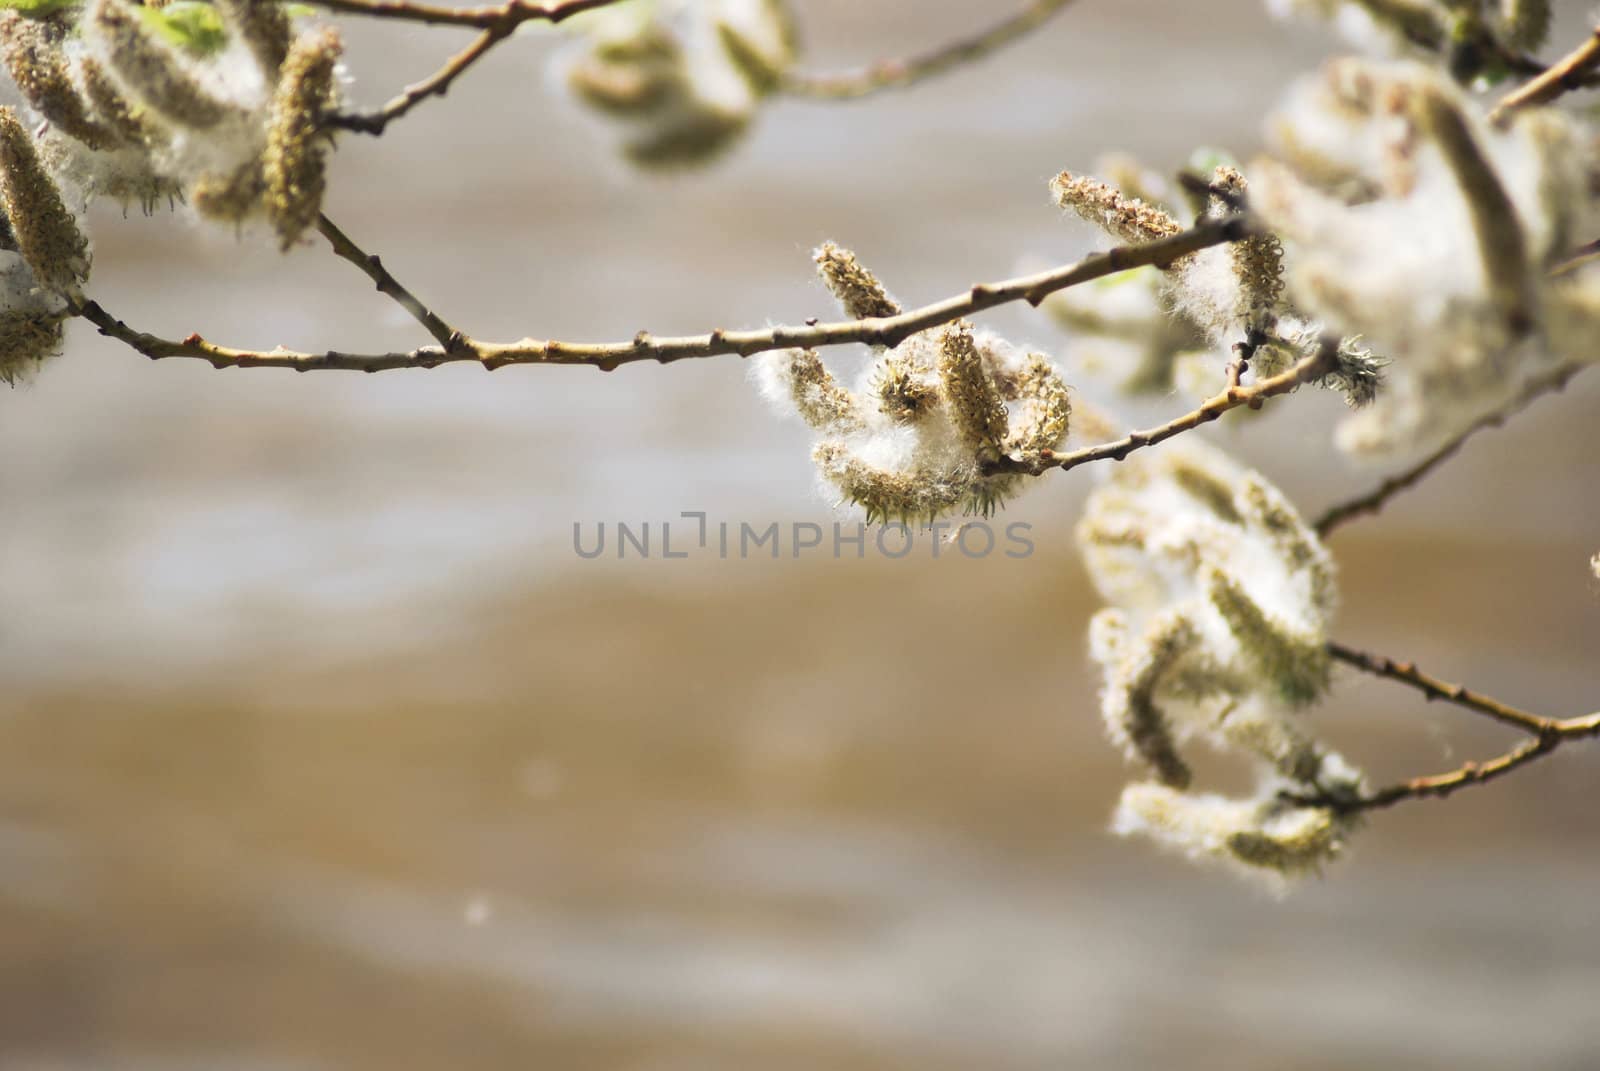 poplar down on water background at the summer, cottonwood fluff  by svtrotof